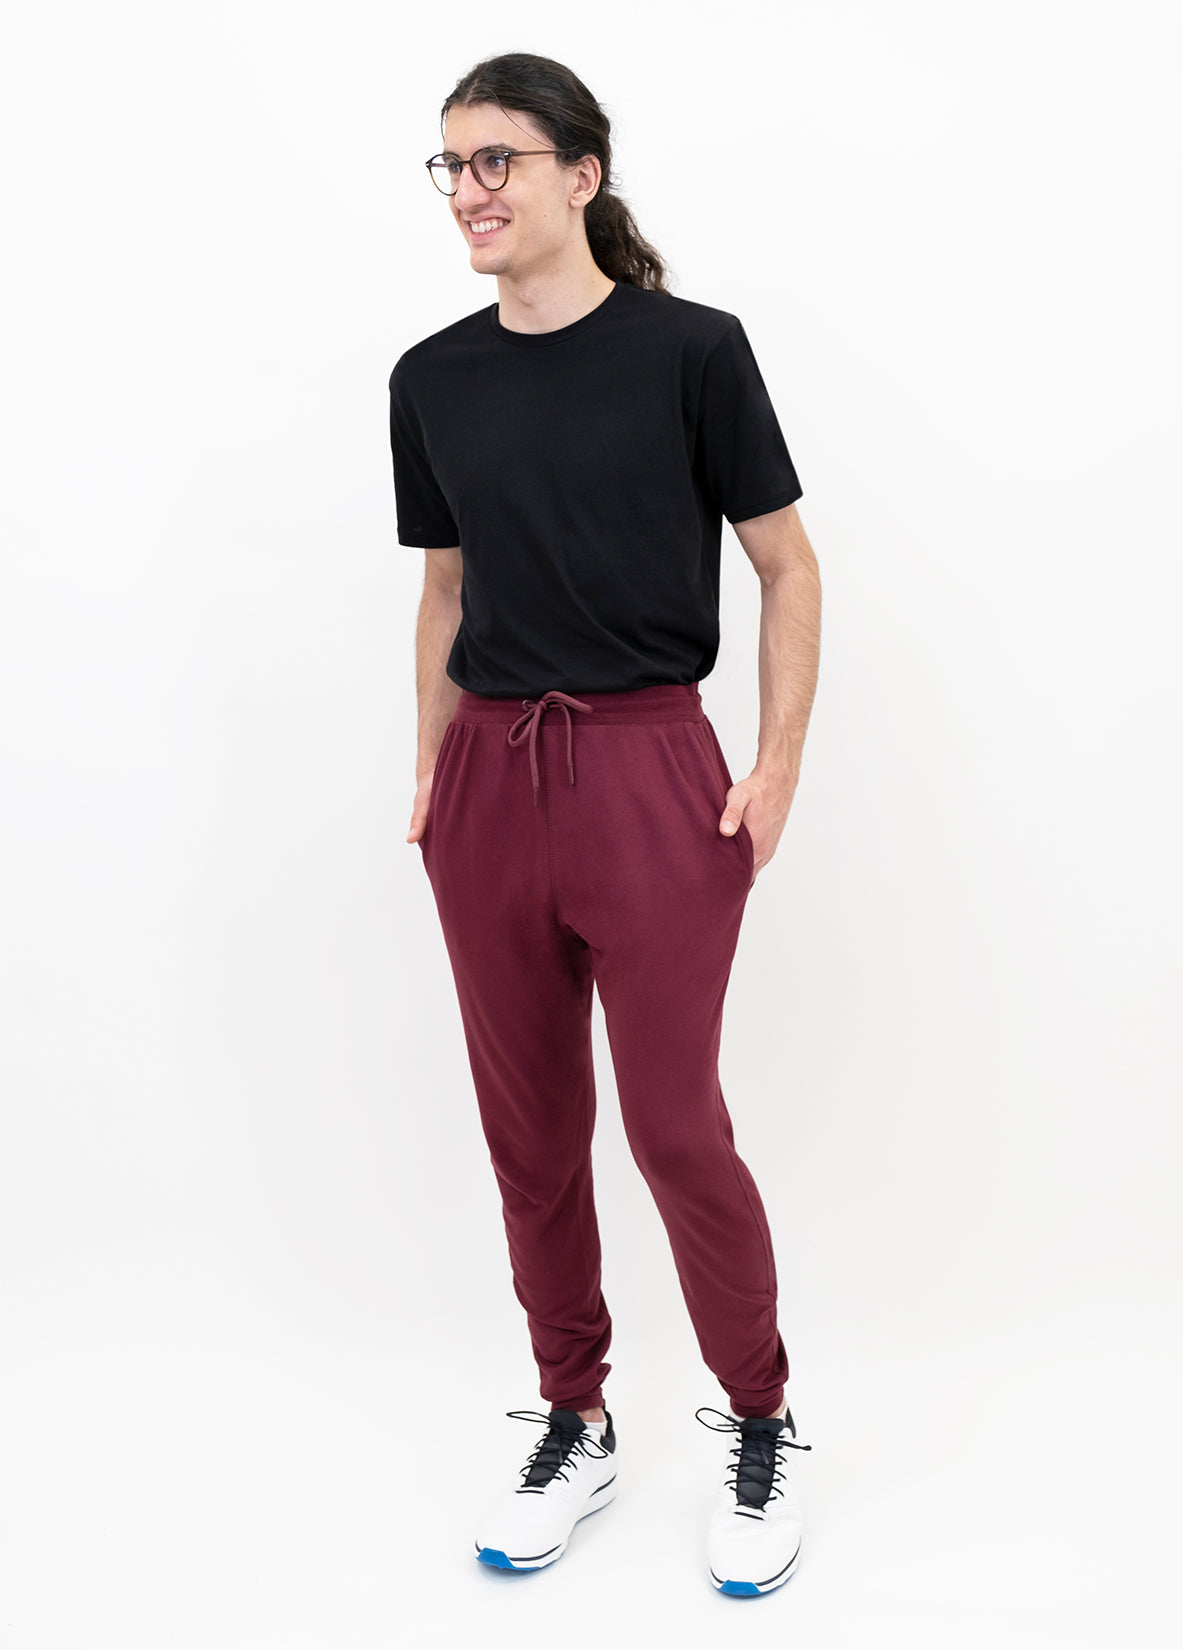 YoungLA Mens Joggers Sweatpants Casual Skinny Fit Athletic Activewear  Cotton Pants with Pockets 211 Burgundy Large price in UAE,  UAE